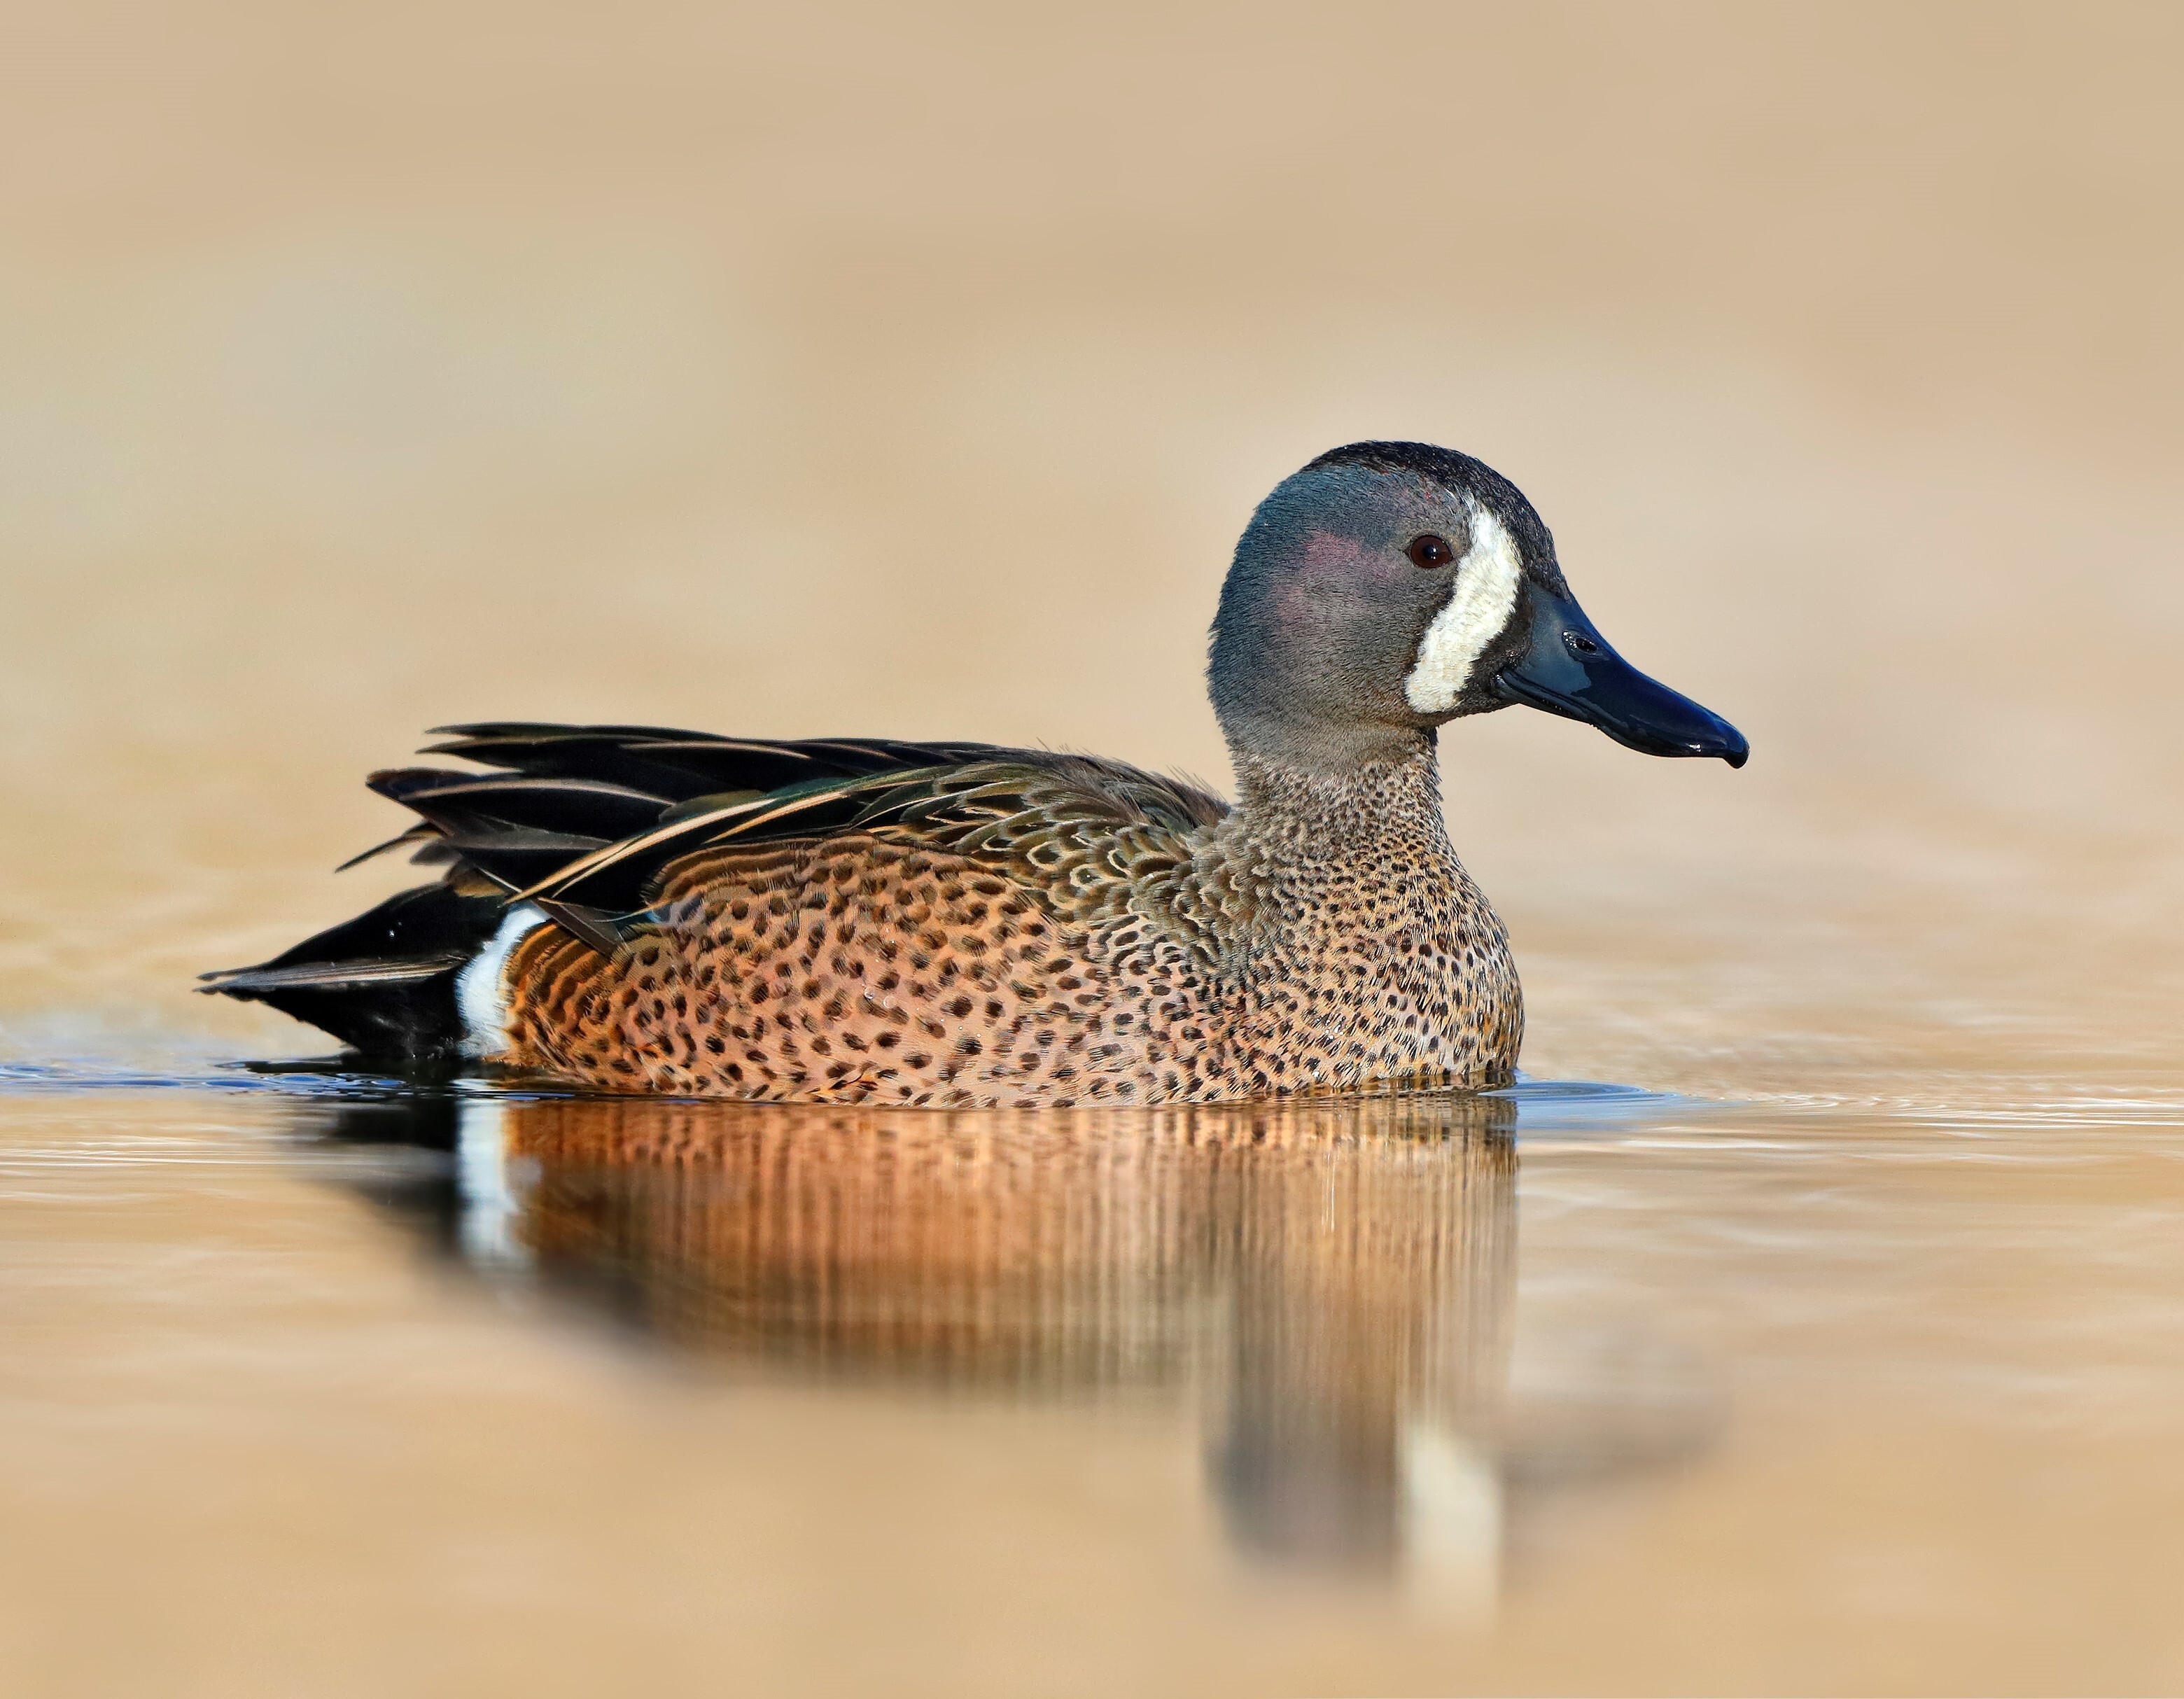 Willowbrook Park's wetlands occasionally attract less common species like Blue-winged Teal. Photo: <a href="https://www.flickr.com/photos/120553232@N02/" target="_blank">Isaac Grant</a>